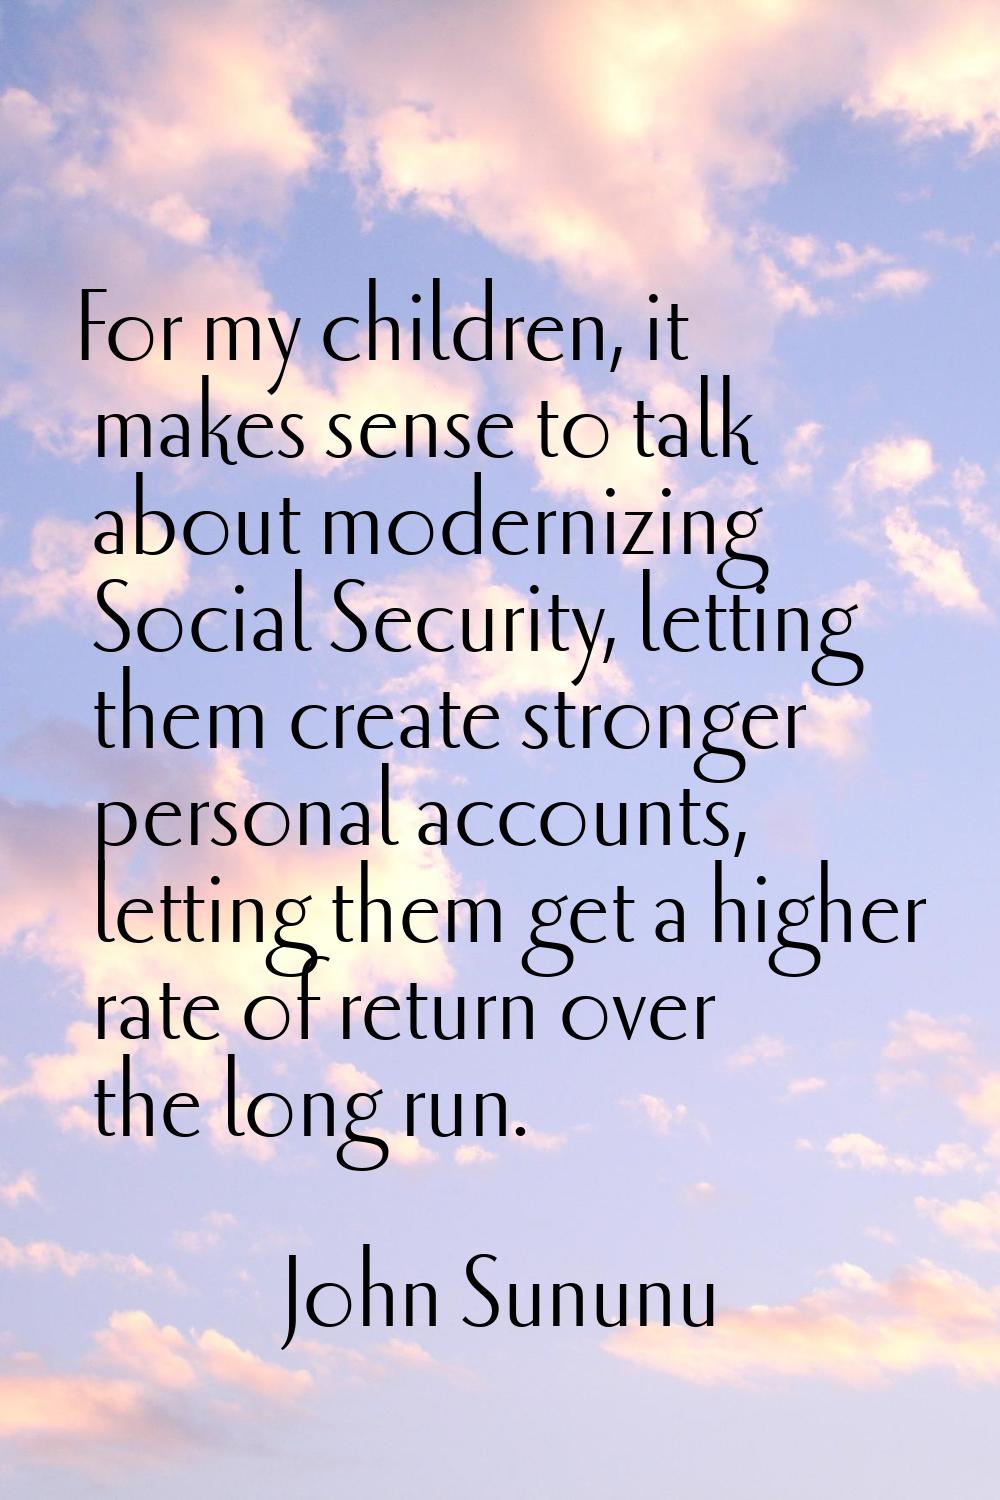 For my children, it makes sense to talk about modernizing Social Security, letting them create stro